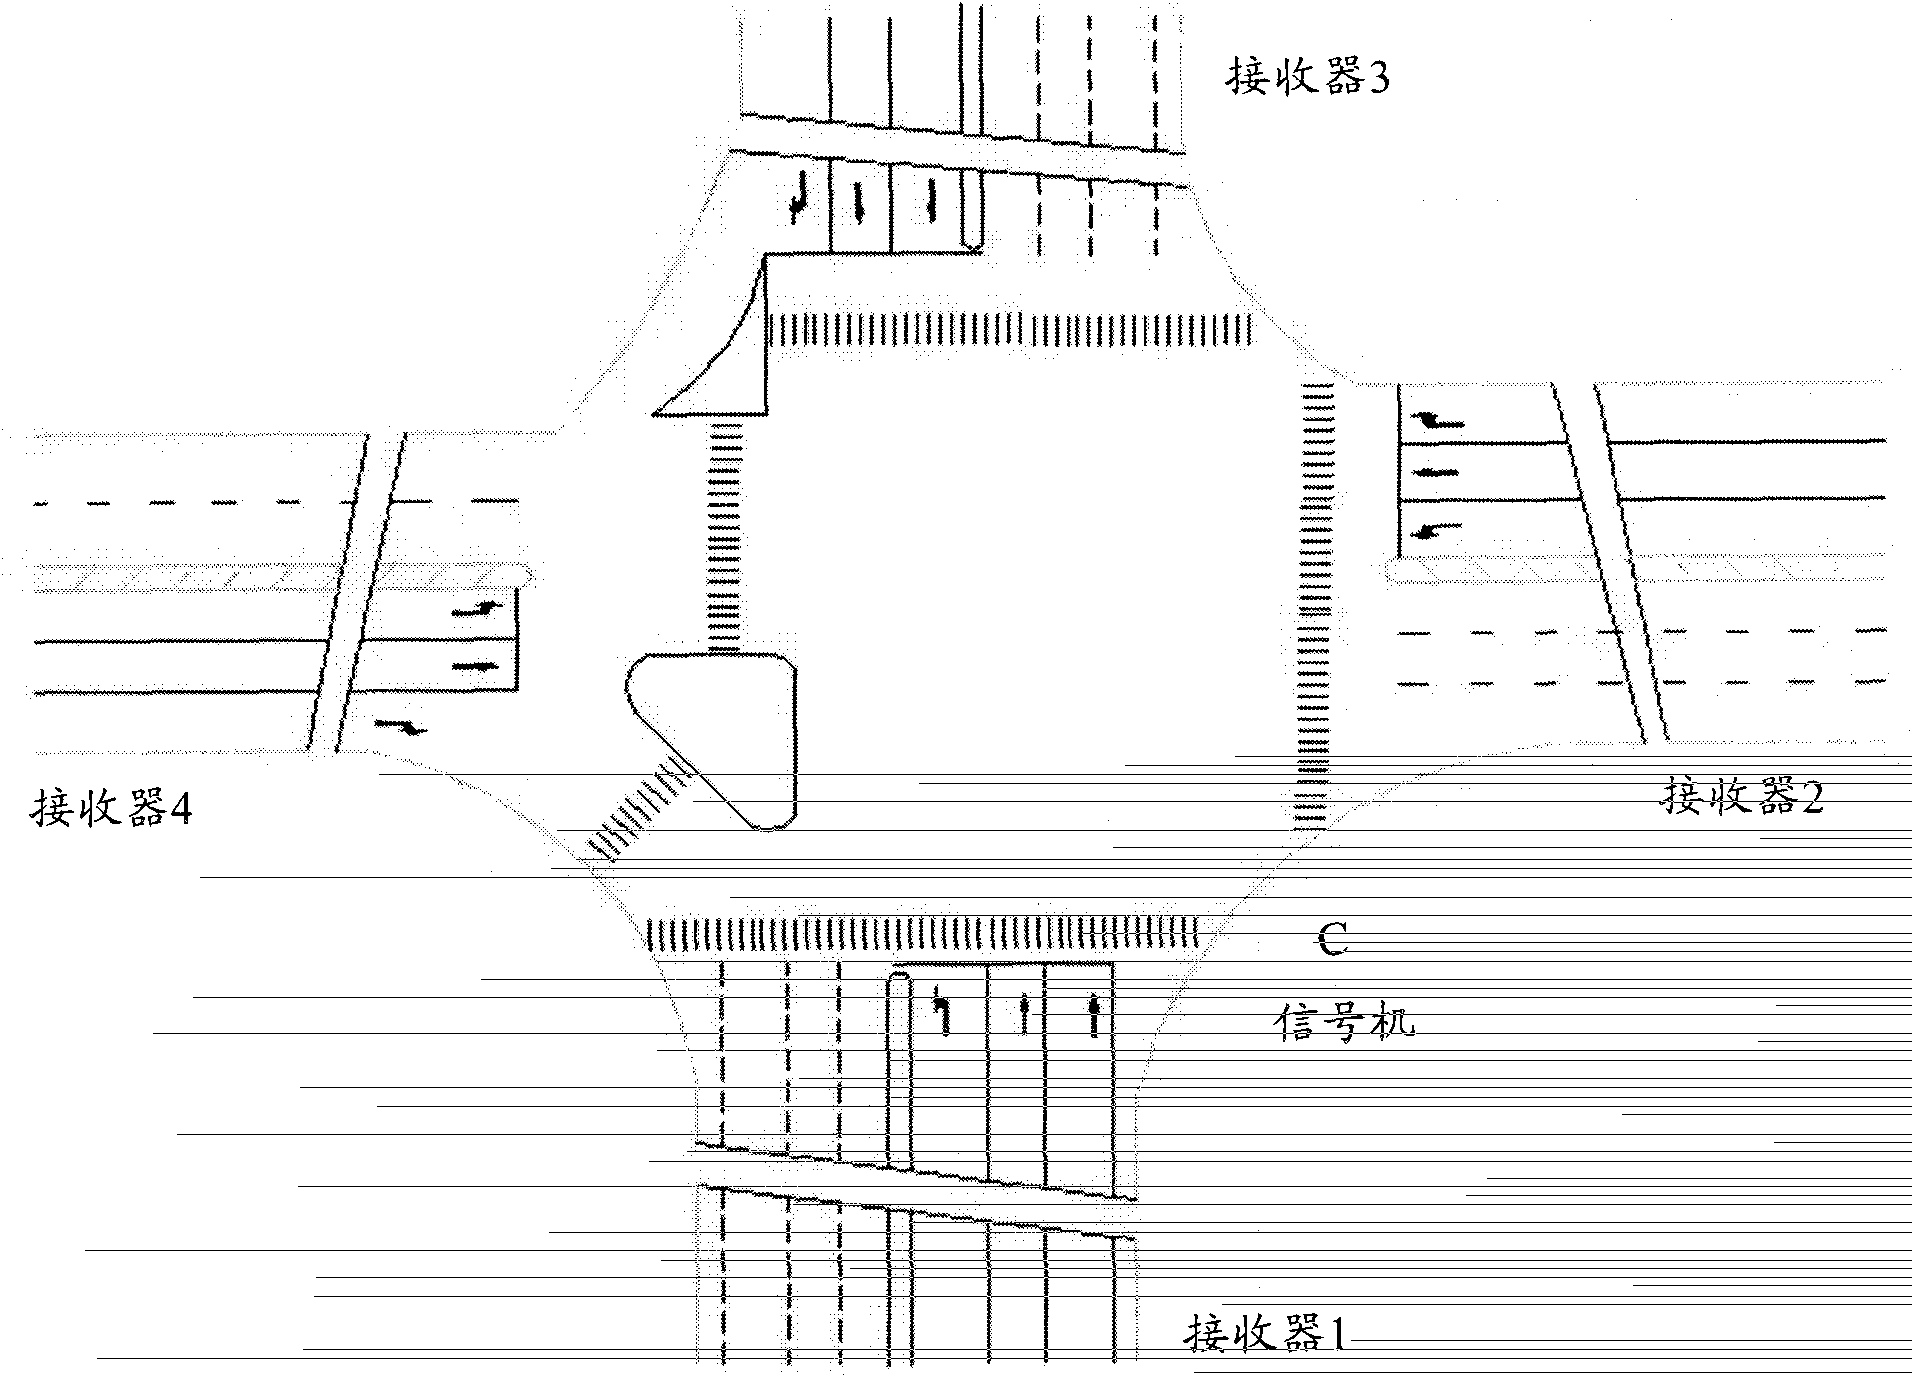 Traffic management system and method